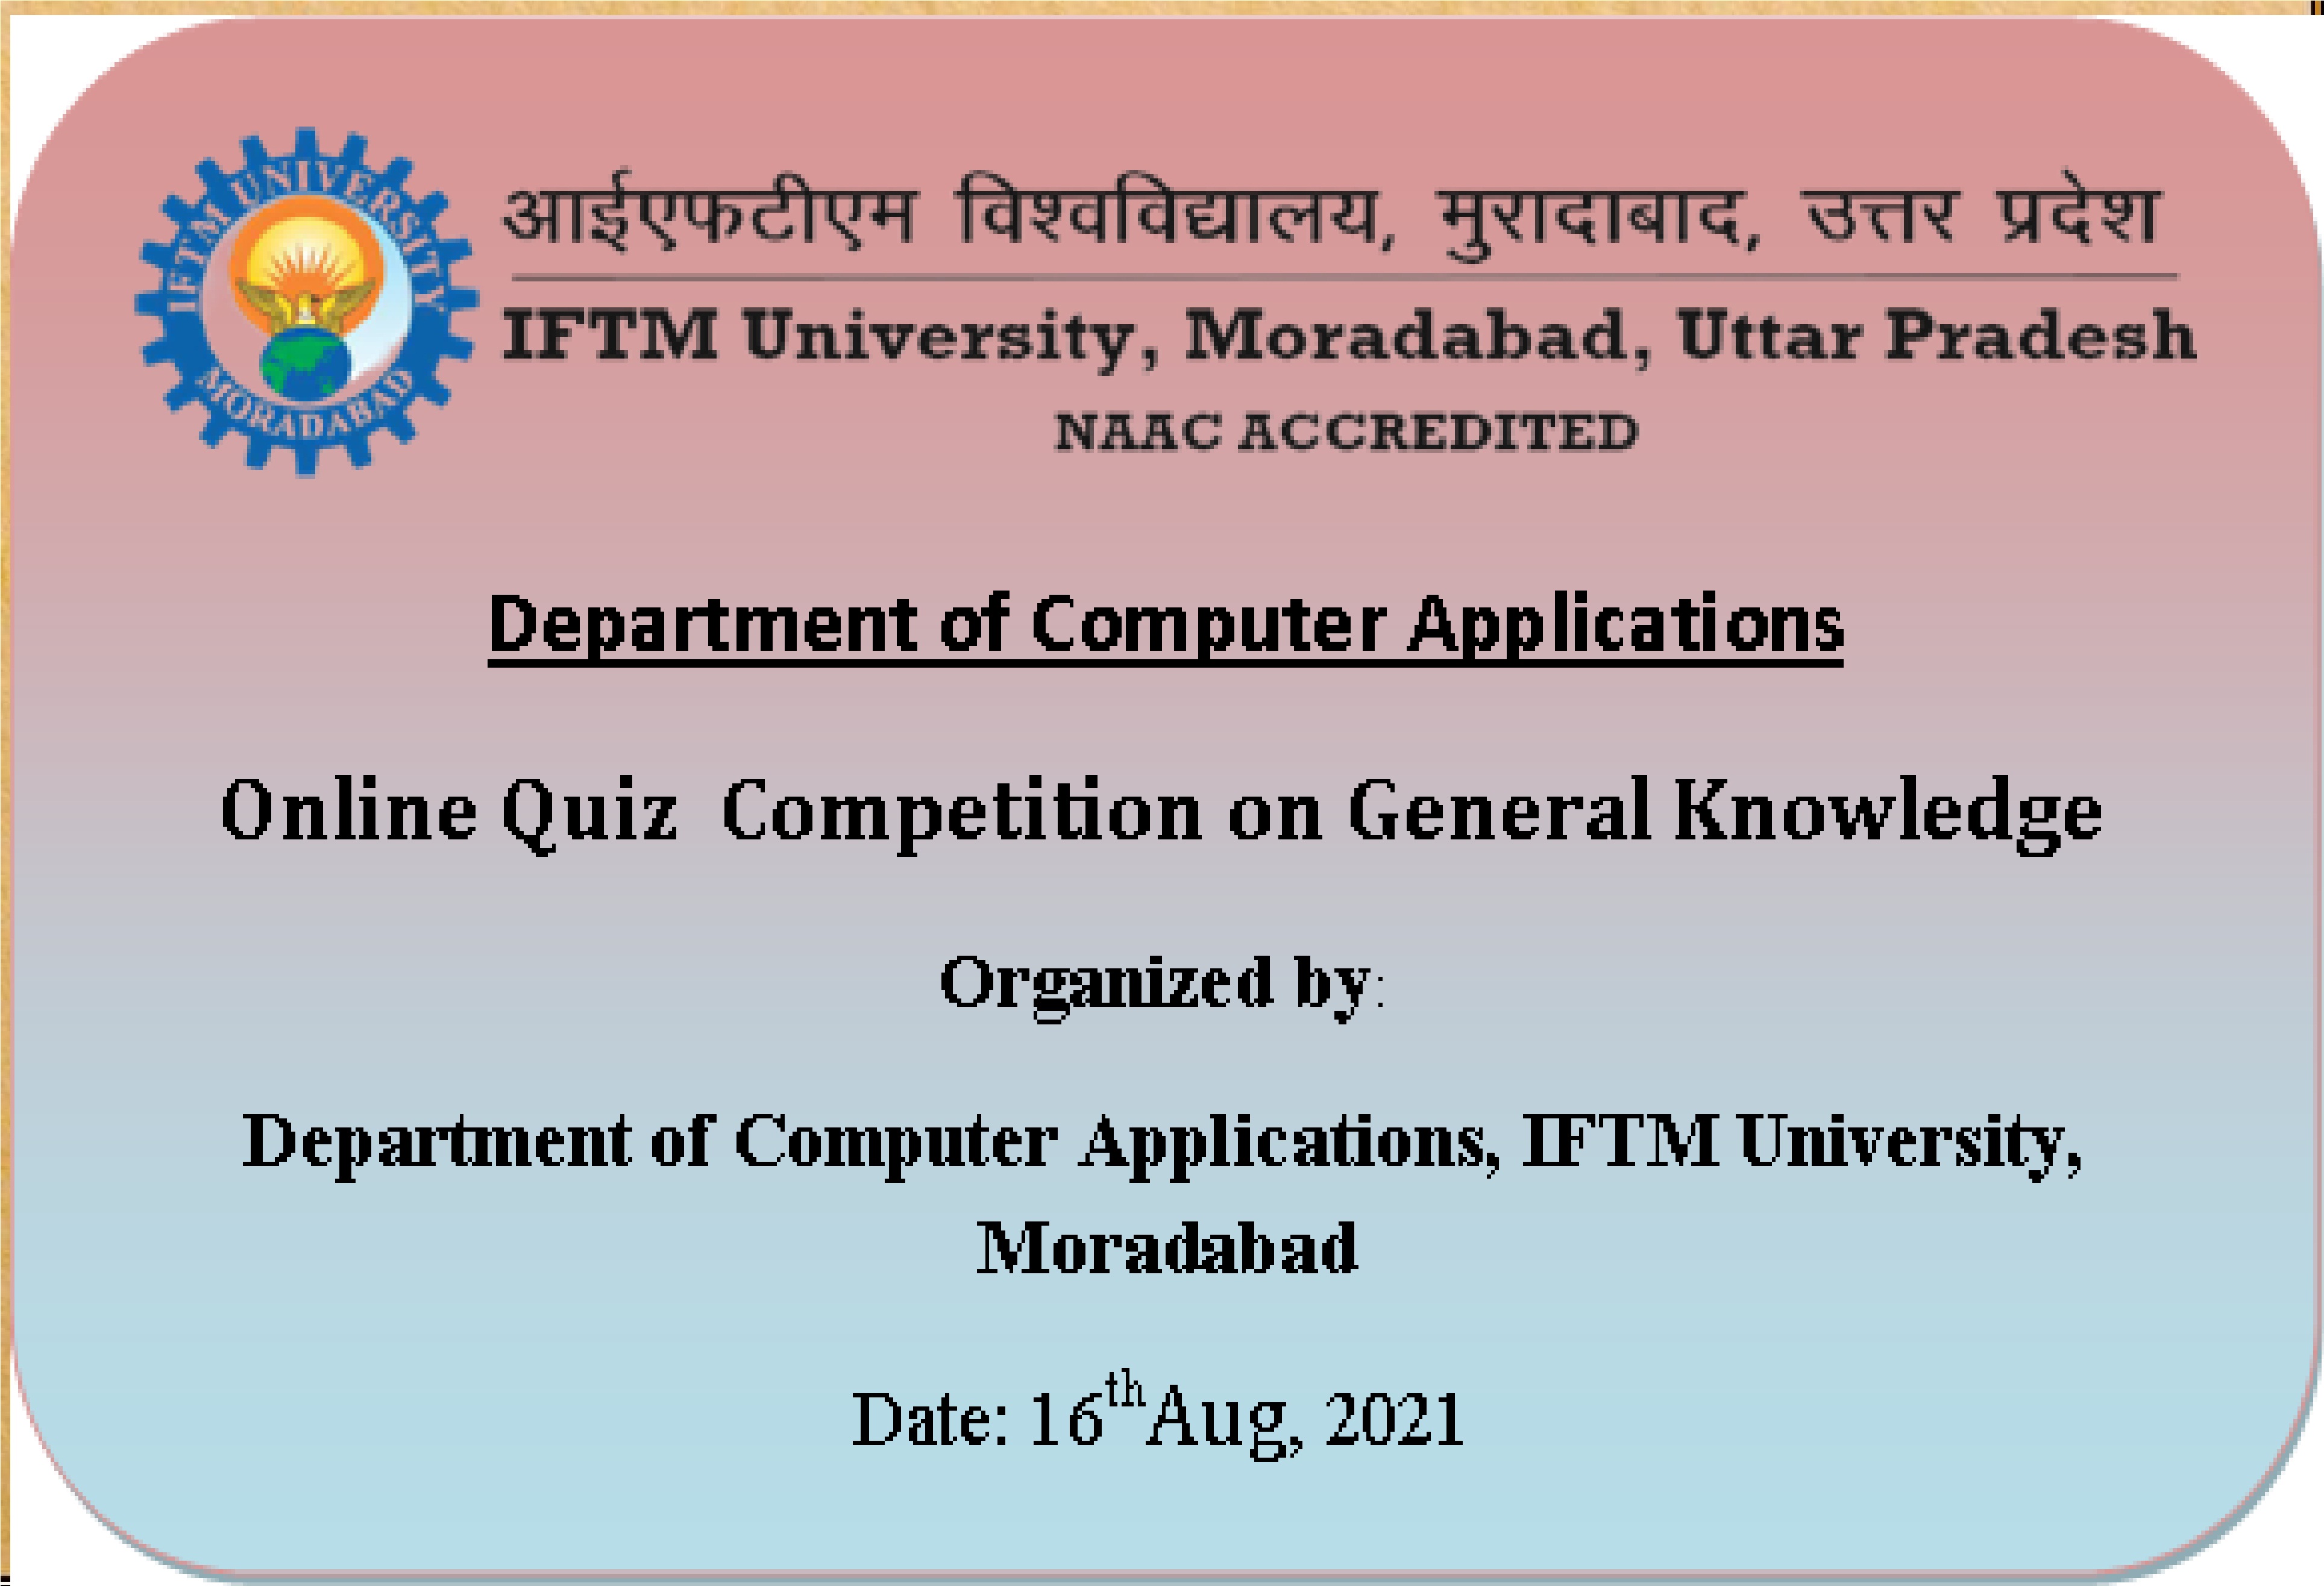 Online Quiz Competition on General Knowledge